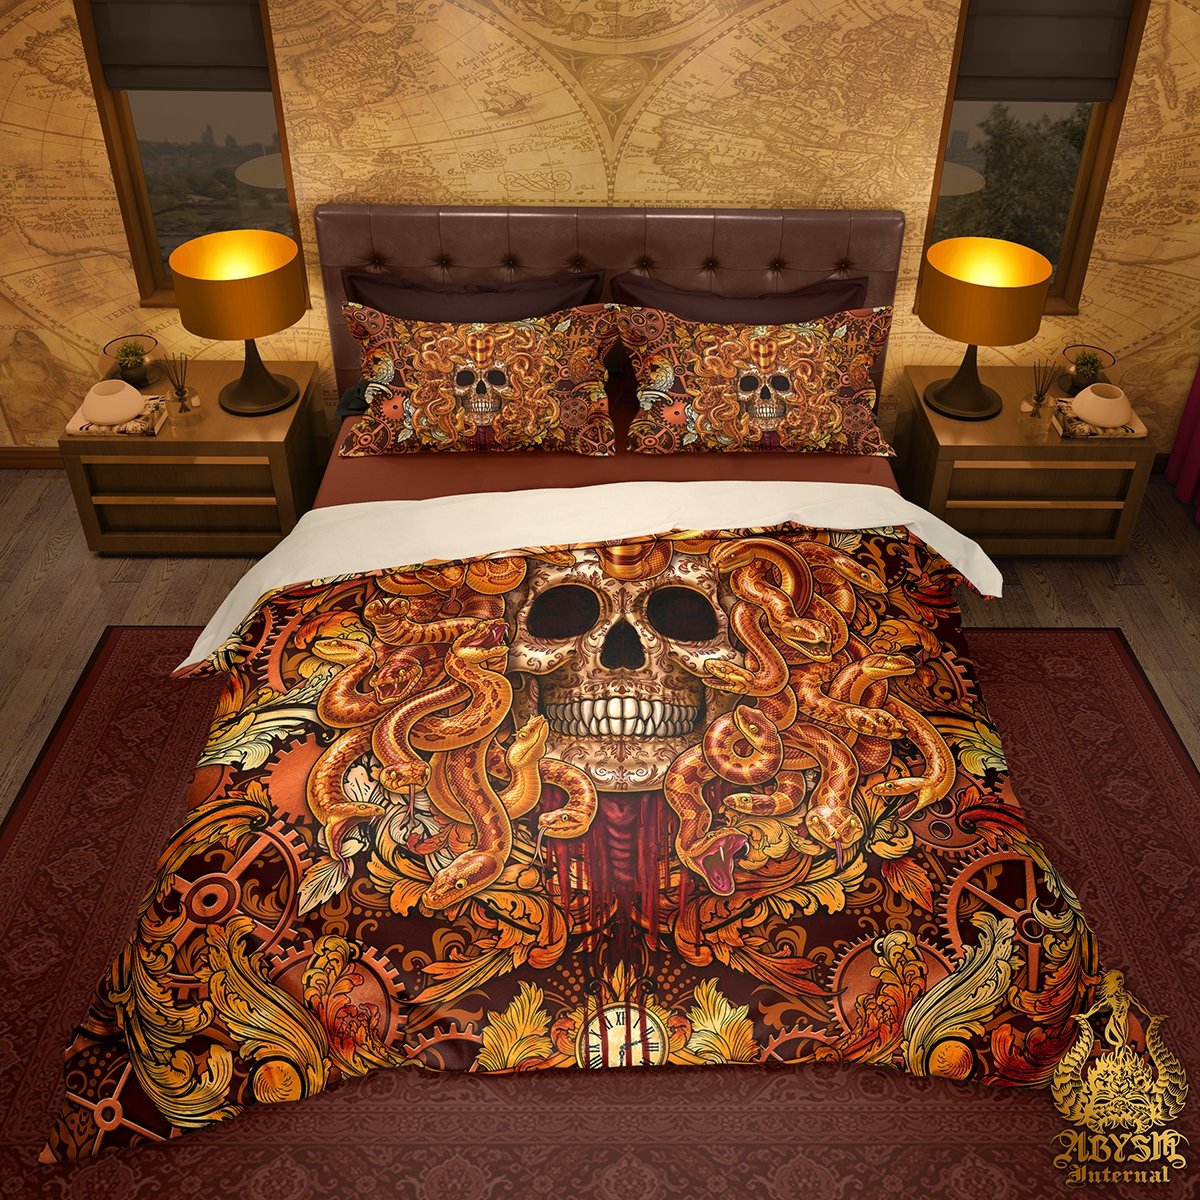 Steampunk Bedding Set, Comforter and Duvet, Victorian Goth Bed Cover and Bedroom Decor, King, Queen and Twin Size - Medusa Skull - Abysm Internal